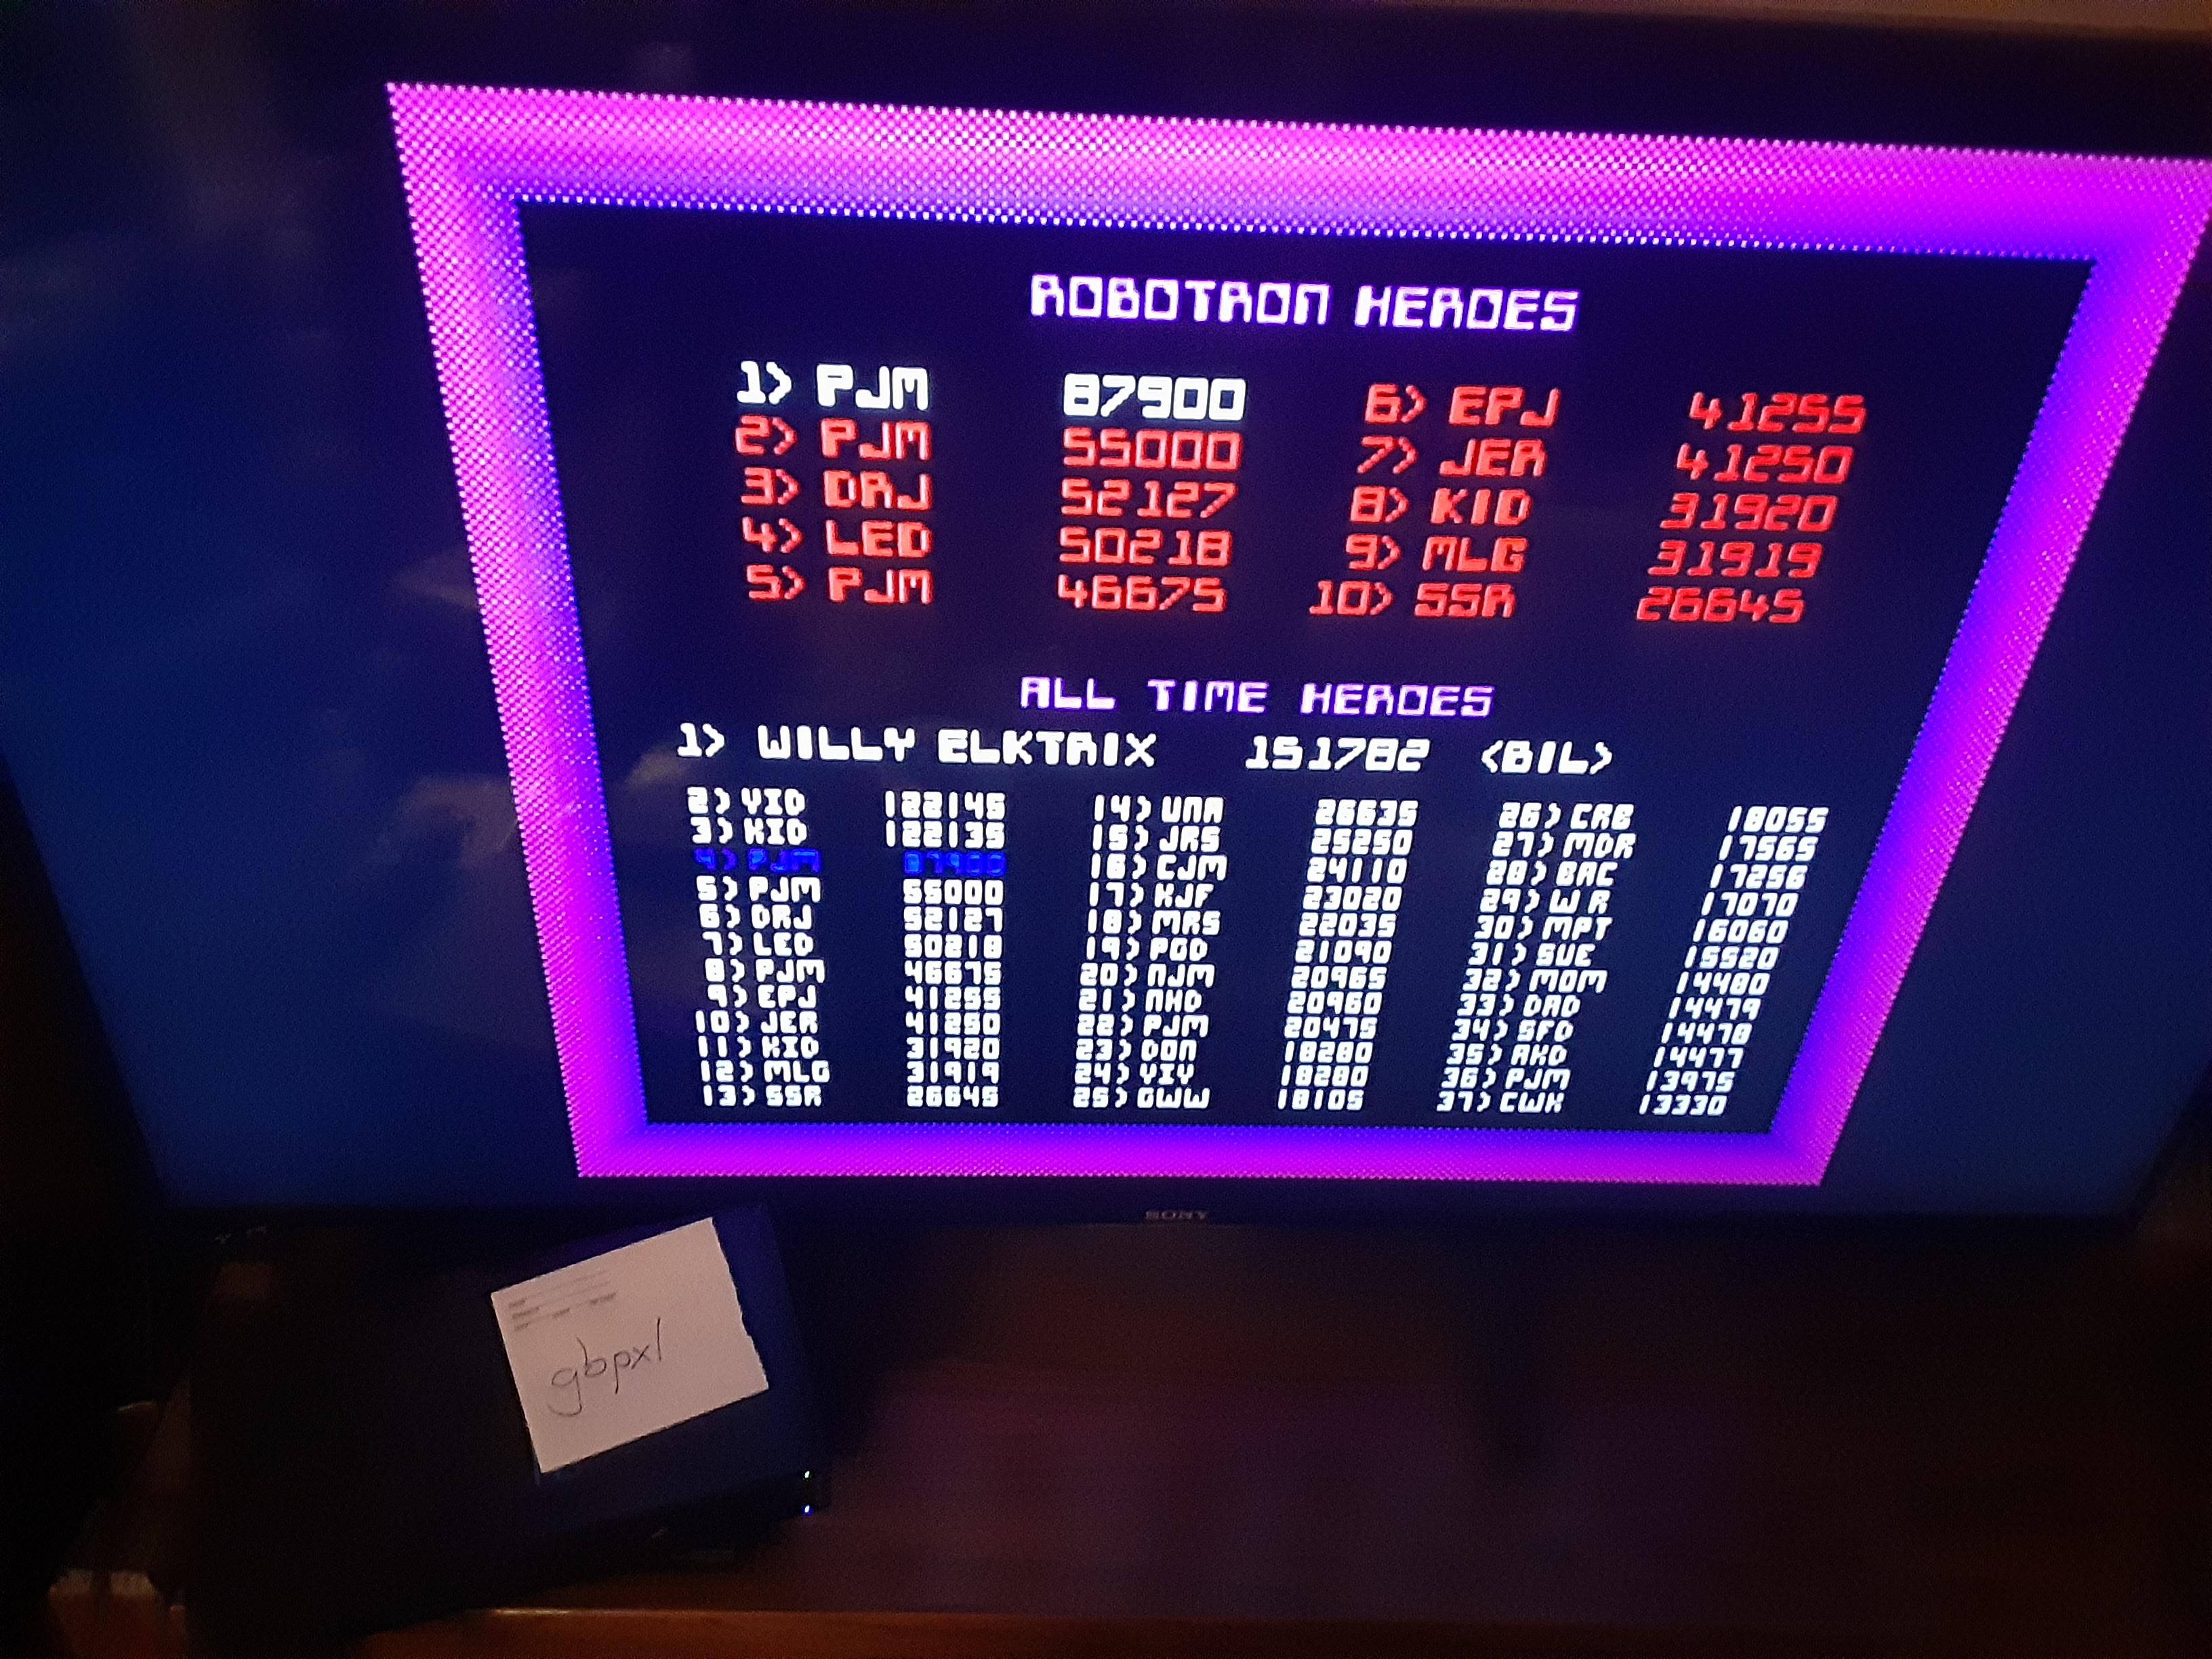 gbpxl: Midway Arcade Treasures: Robotron 2084 (Playstation 2) 87,900 points on 2020-01-01 20:13:40